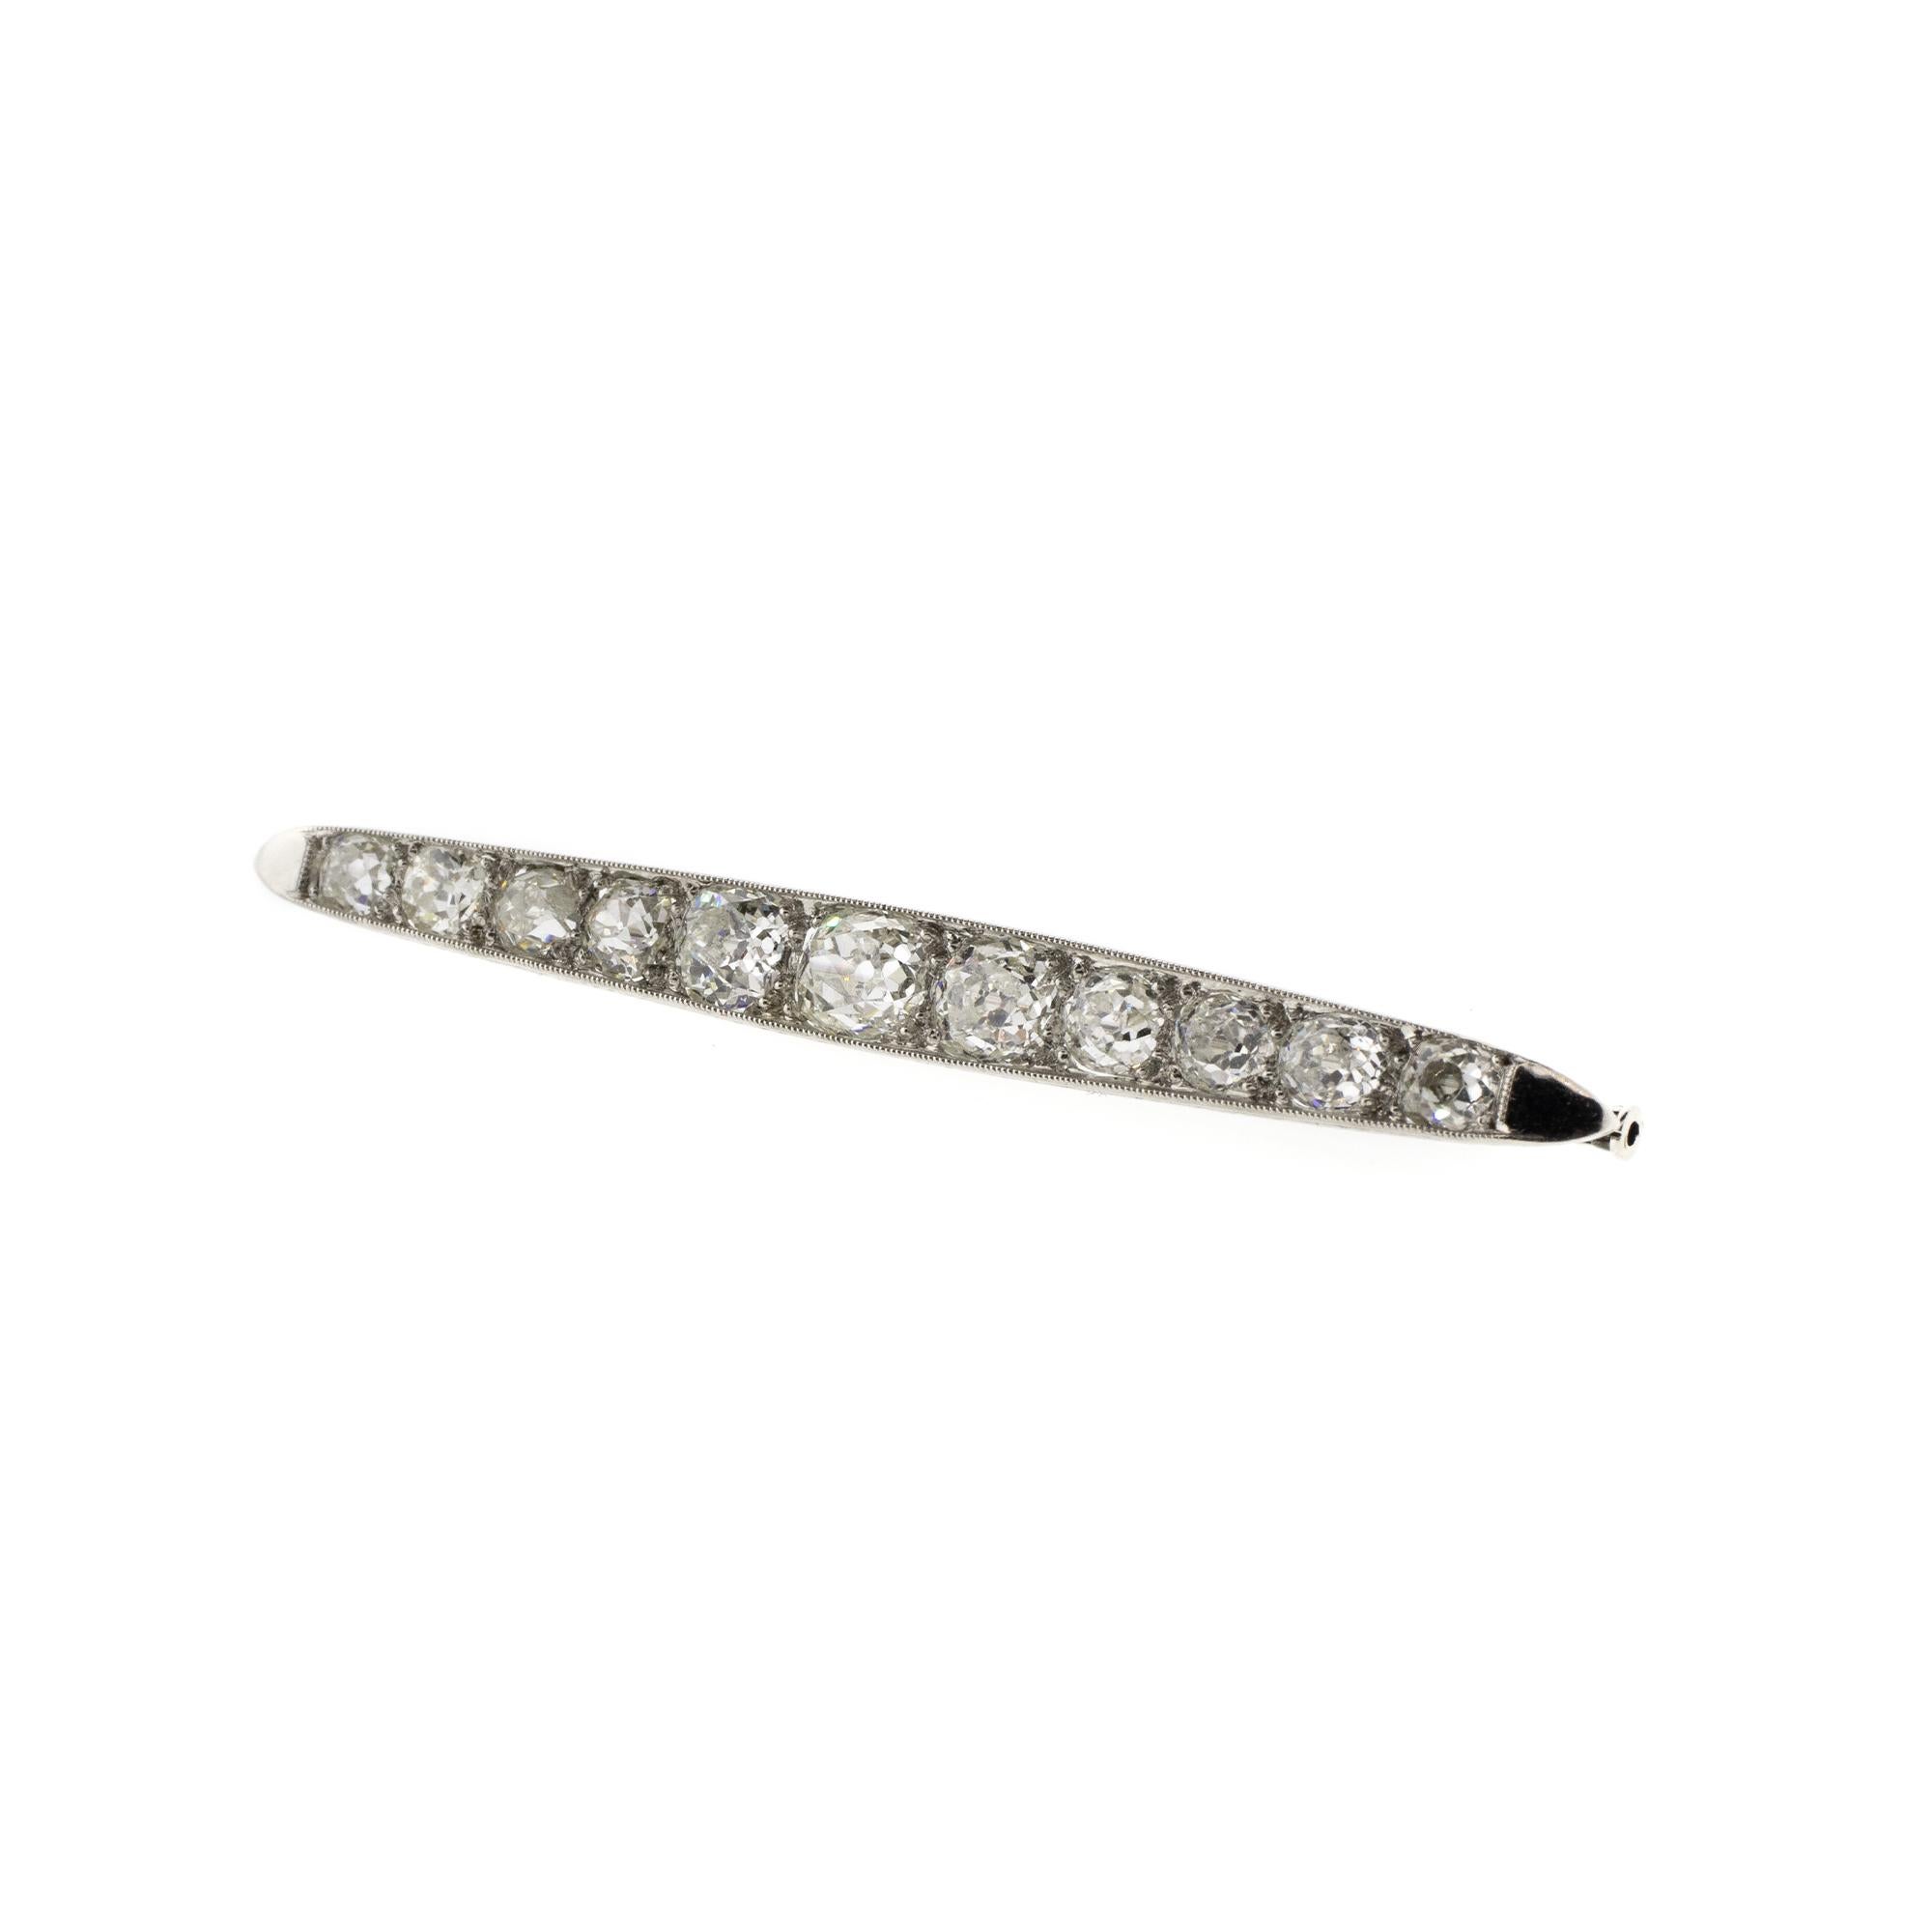 An antique original Art Deco brooch with a classic look and elegant details. Eleven graduated diamonds with a total carat weight of approximately 4.26ctw shine bright in gleaming platinum, with delicate scrollwork along the sides. The color of the